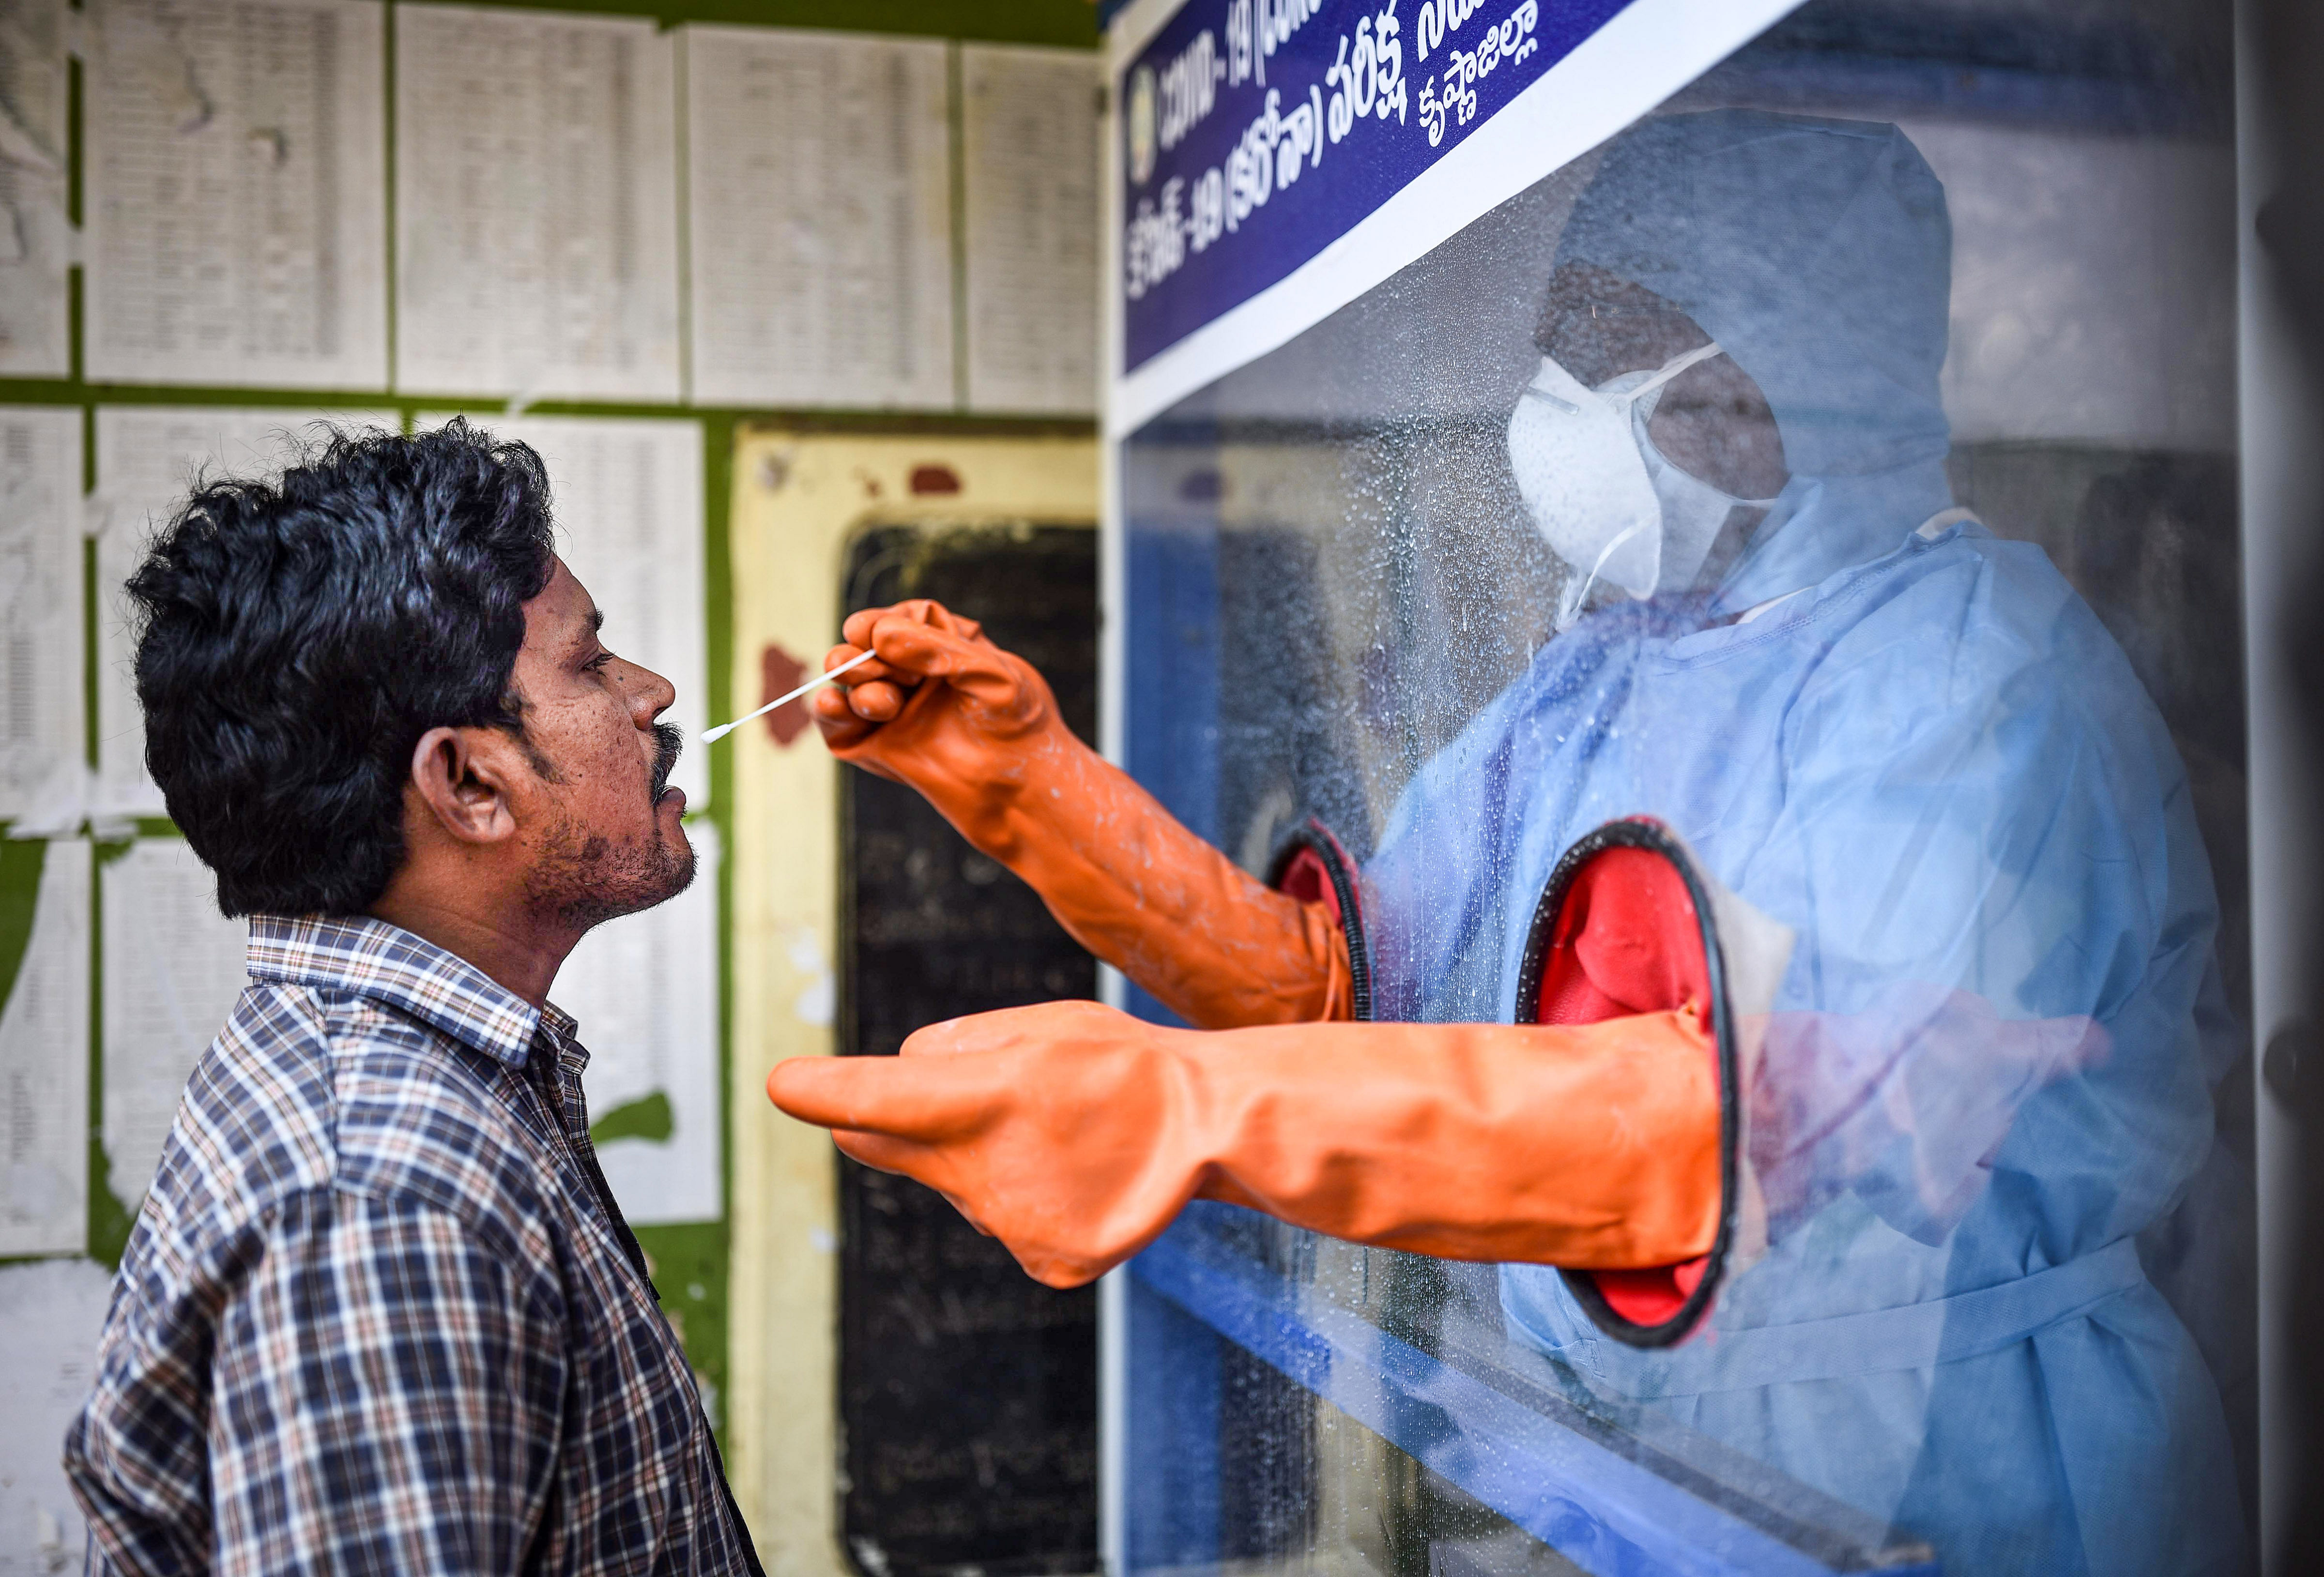 Vijayawada: A healthcare worker collects a swab sample of a man for COVID-19 test from the swab collection booth (PTI photo)